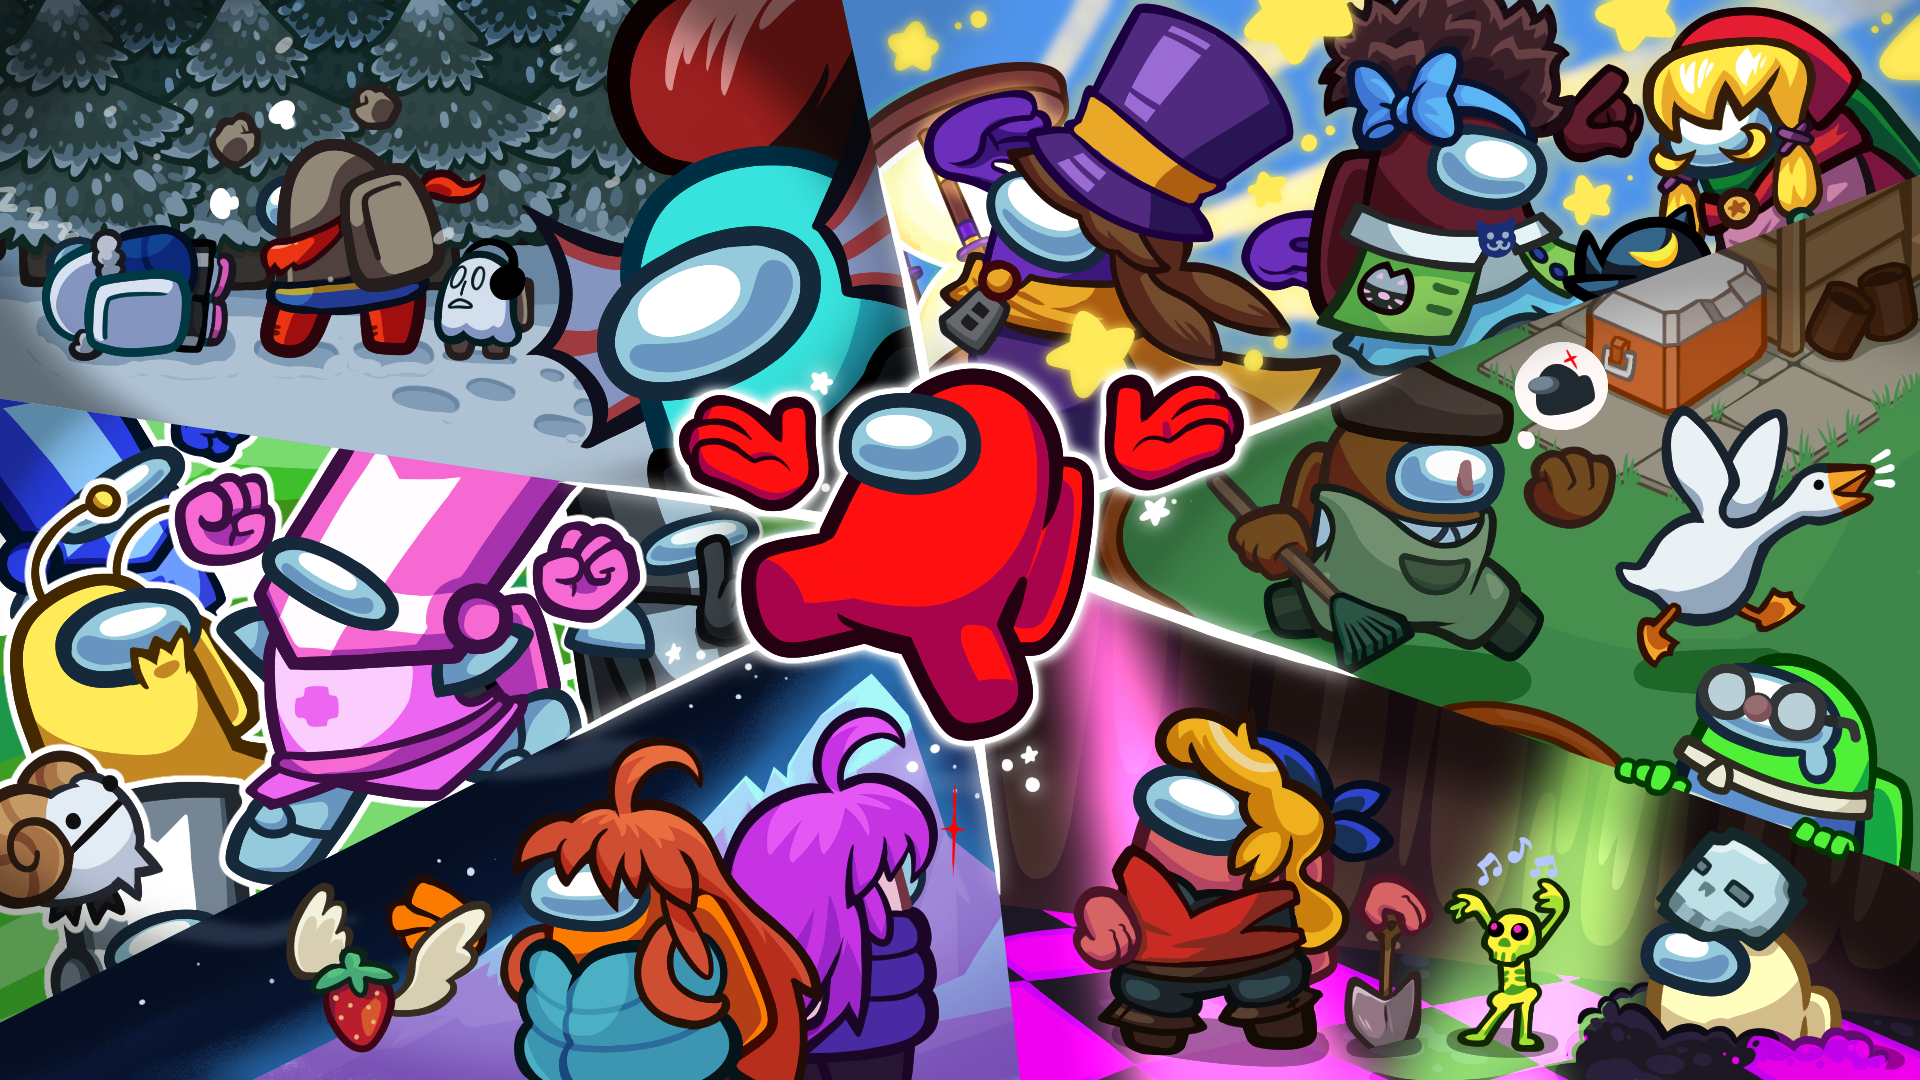 Among Us Announces Collab Featuring Celeste, A Hat in Time, Undertale, Untitled Goose Game & More